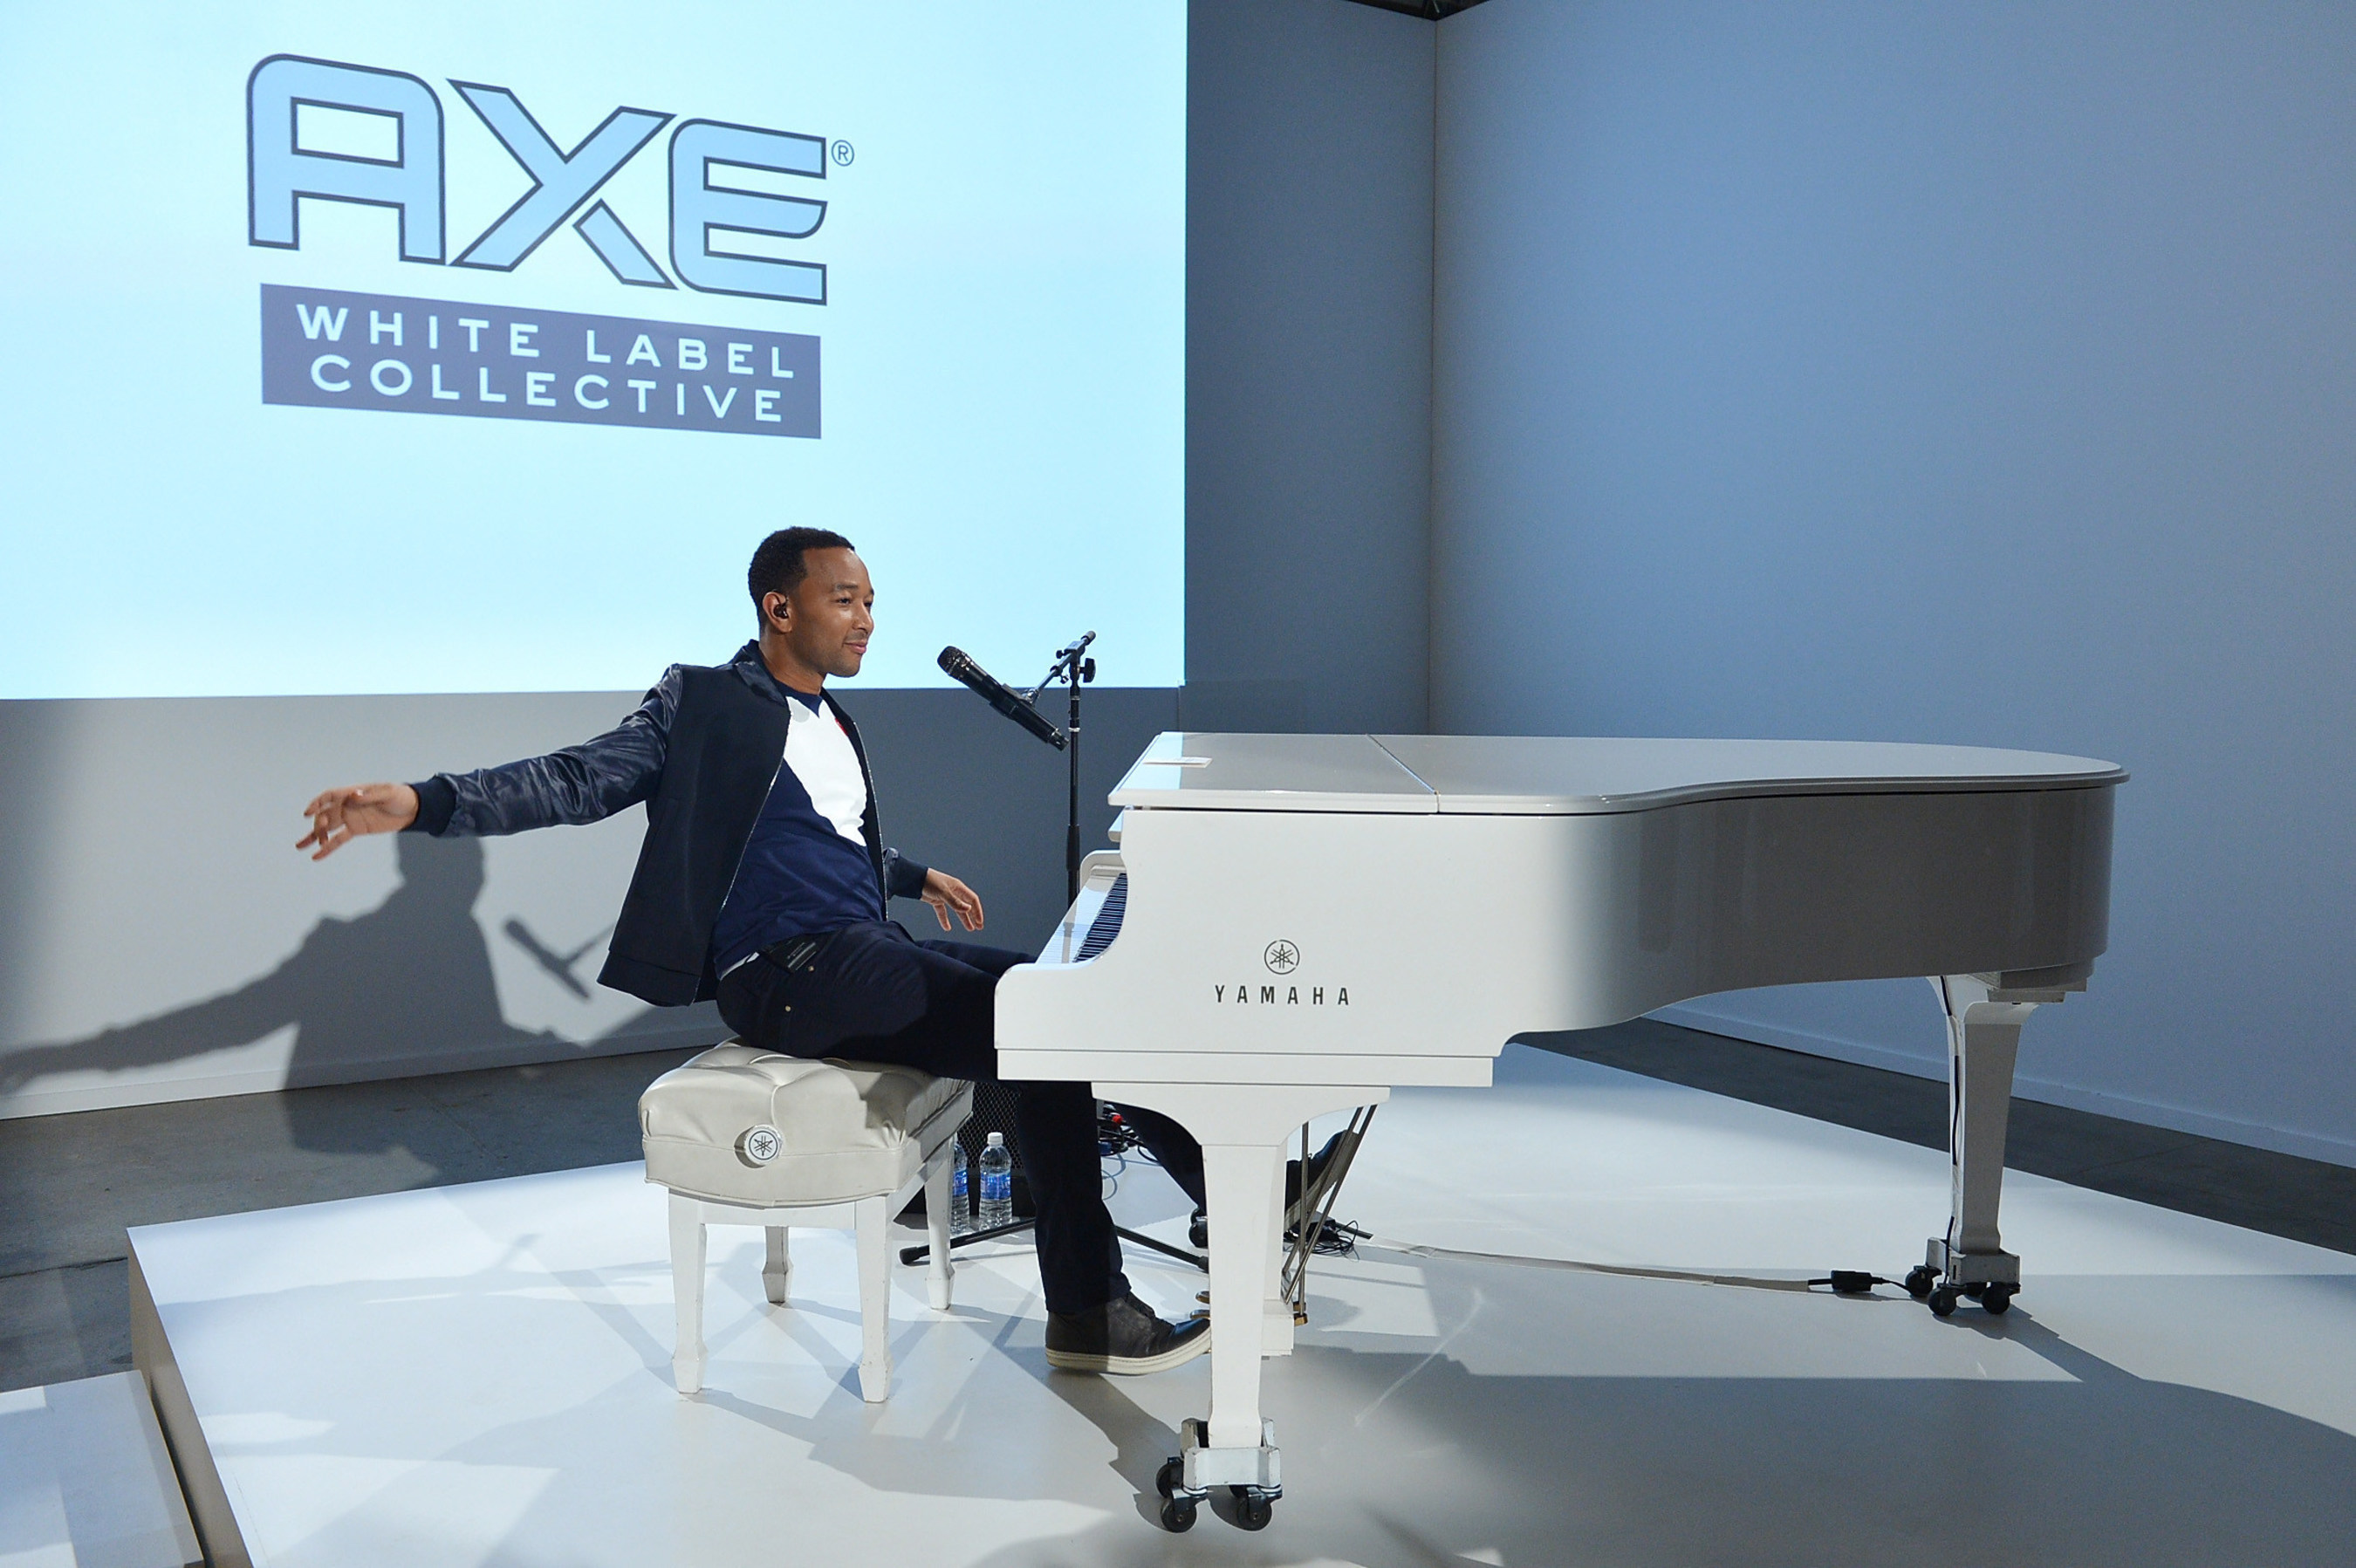 John Legend performs during the AXE White Label Collective launch at The Garage in NYC. Starting January 20, AXE and Legend invite emerging musicians to join the White Label Collective mentorship program.  (Photo by Slaven Vlasic/Getty Images for AXE)